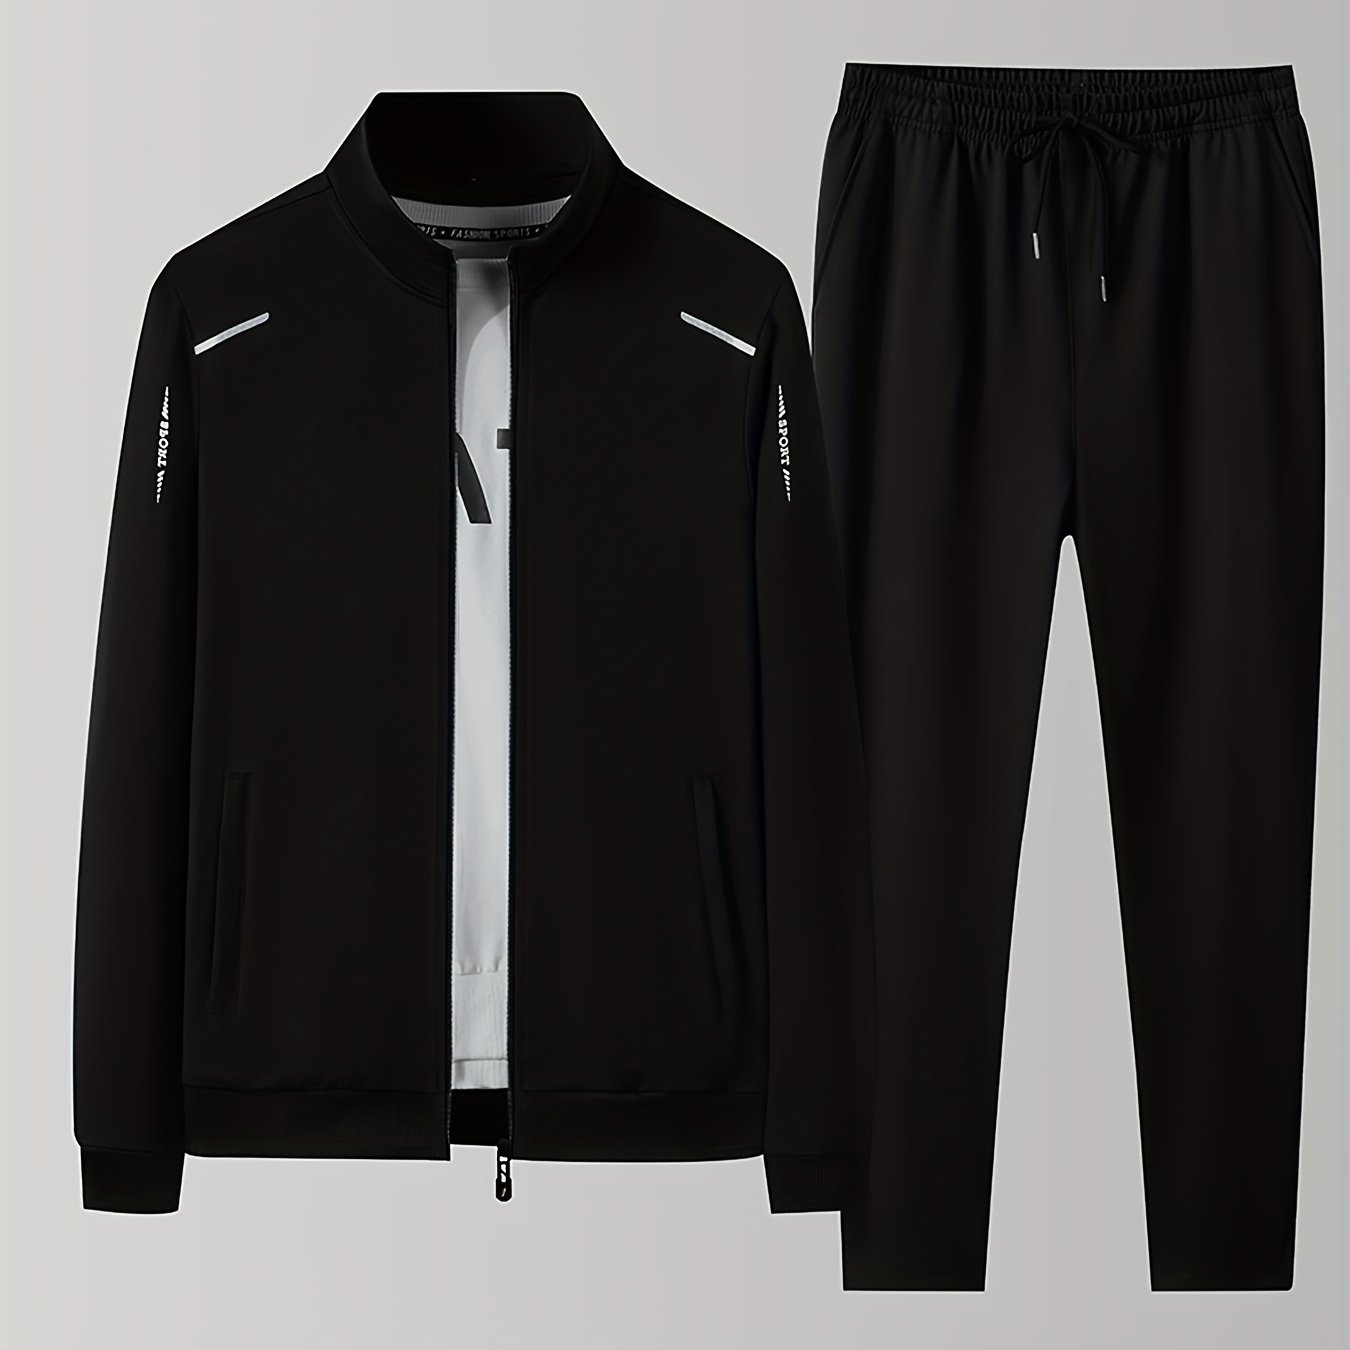 Ultimate Comfort Performance Fleece Men's Athletic Tracksuit - Perfect for Sports and Casual Wear - CasualFlowshop